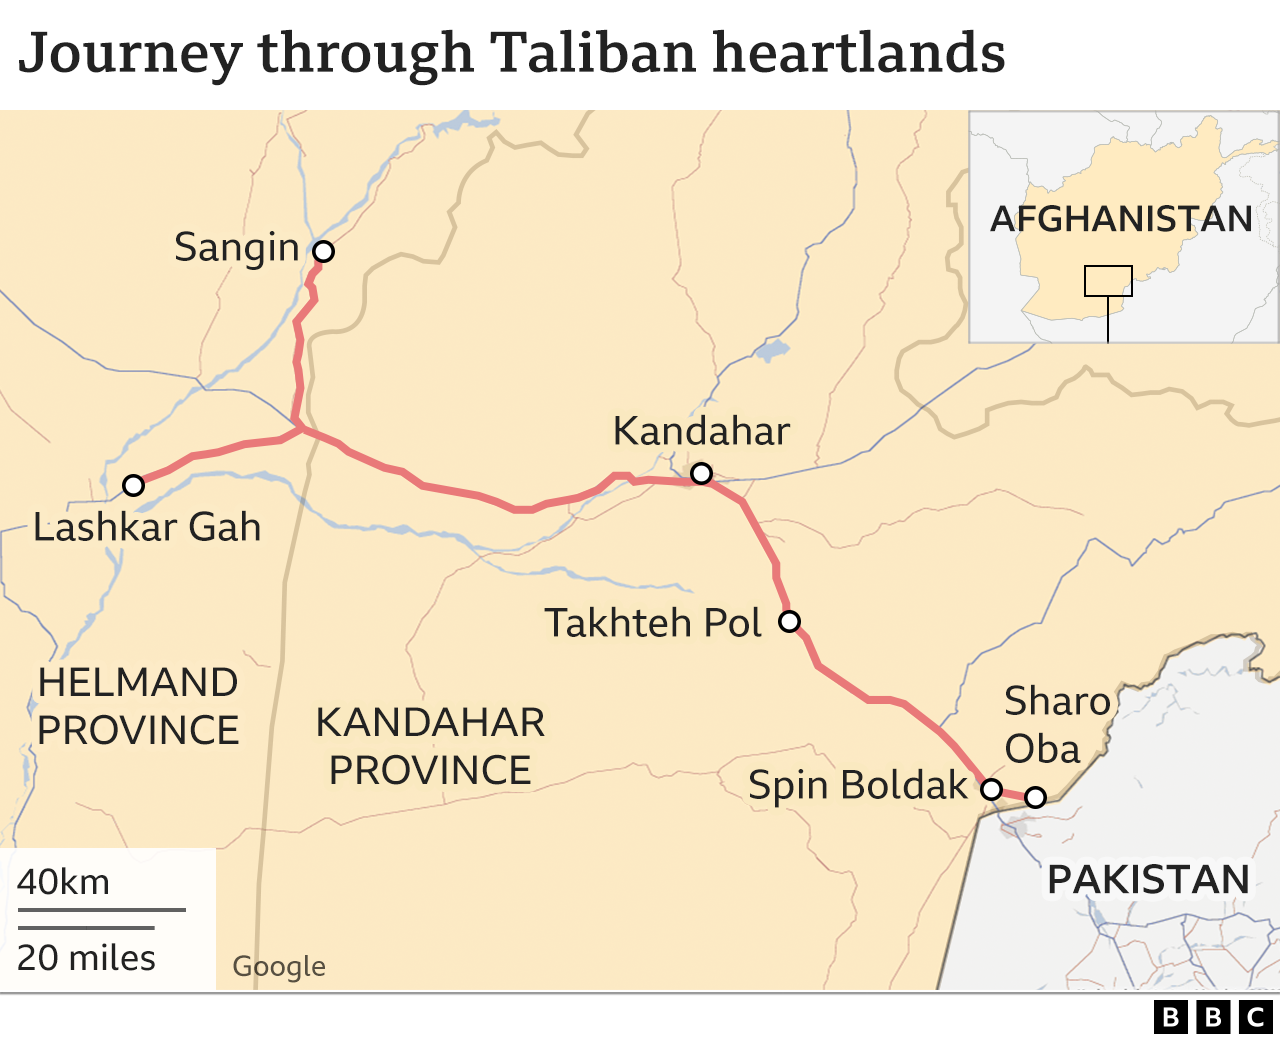 Map of Secunder Kermani's route through southern Afghanistan.